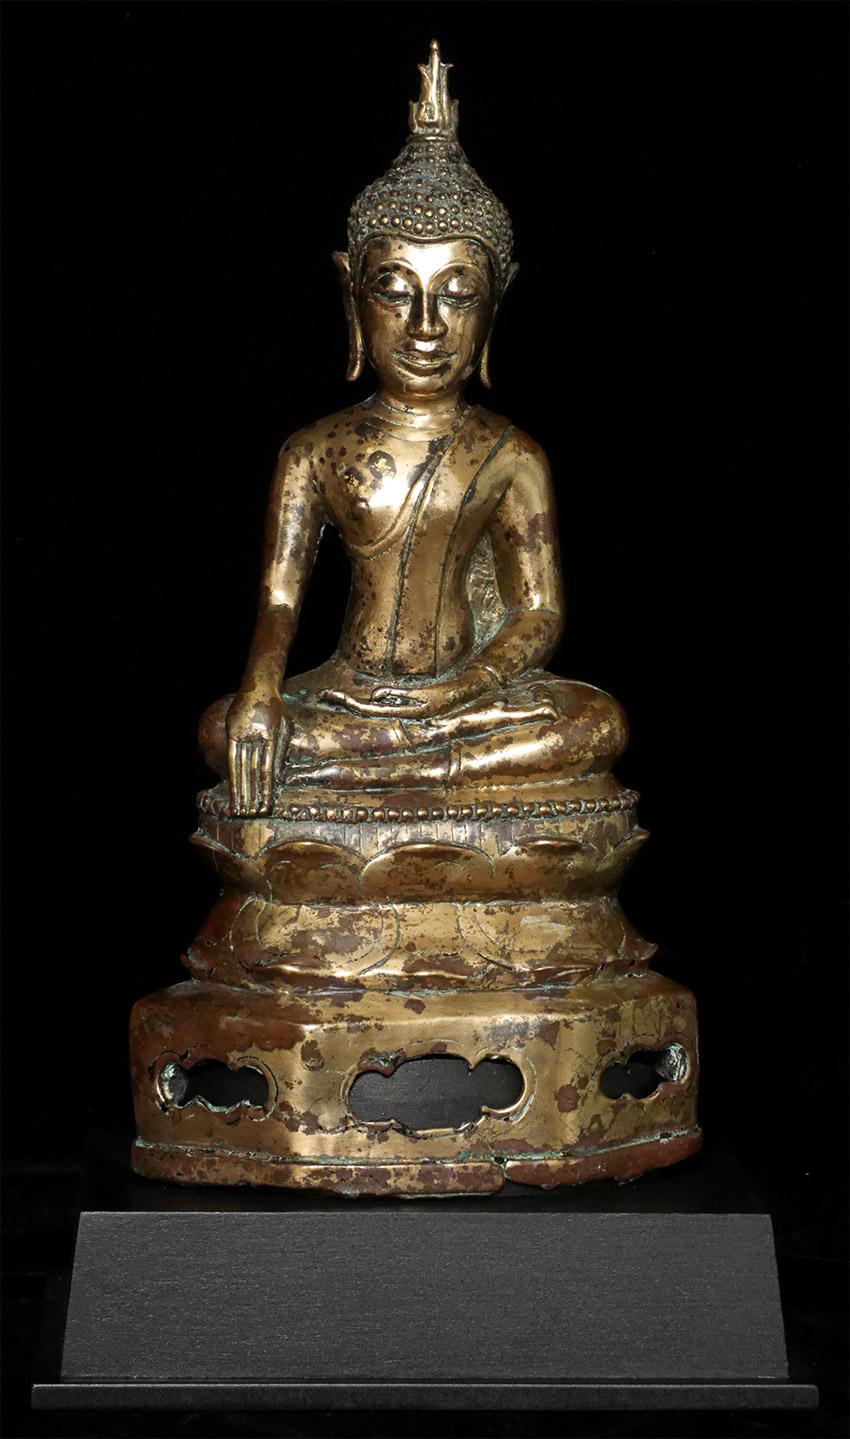 With the very best sculpting and casting of its kind- I present this 16thC Northern Thai Bronze Buddha. Deeply serene face. Nice size at 10 1/8 inches tall, 12 1/8 inches on a custom Stand. Complex patina, with some past cleaning that was likely